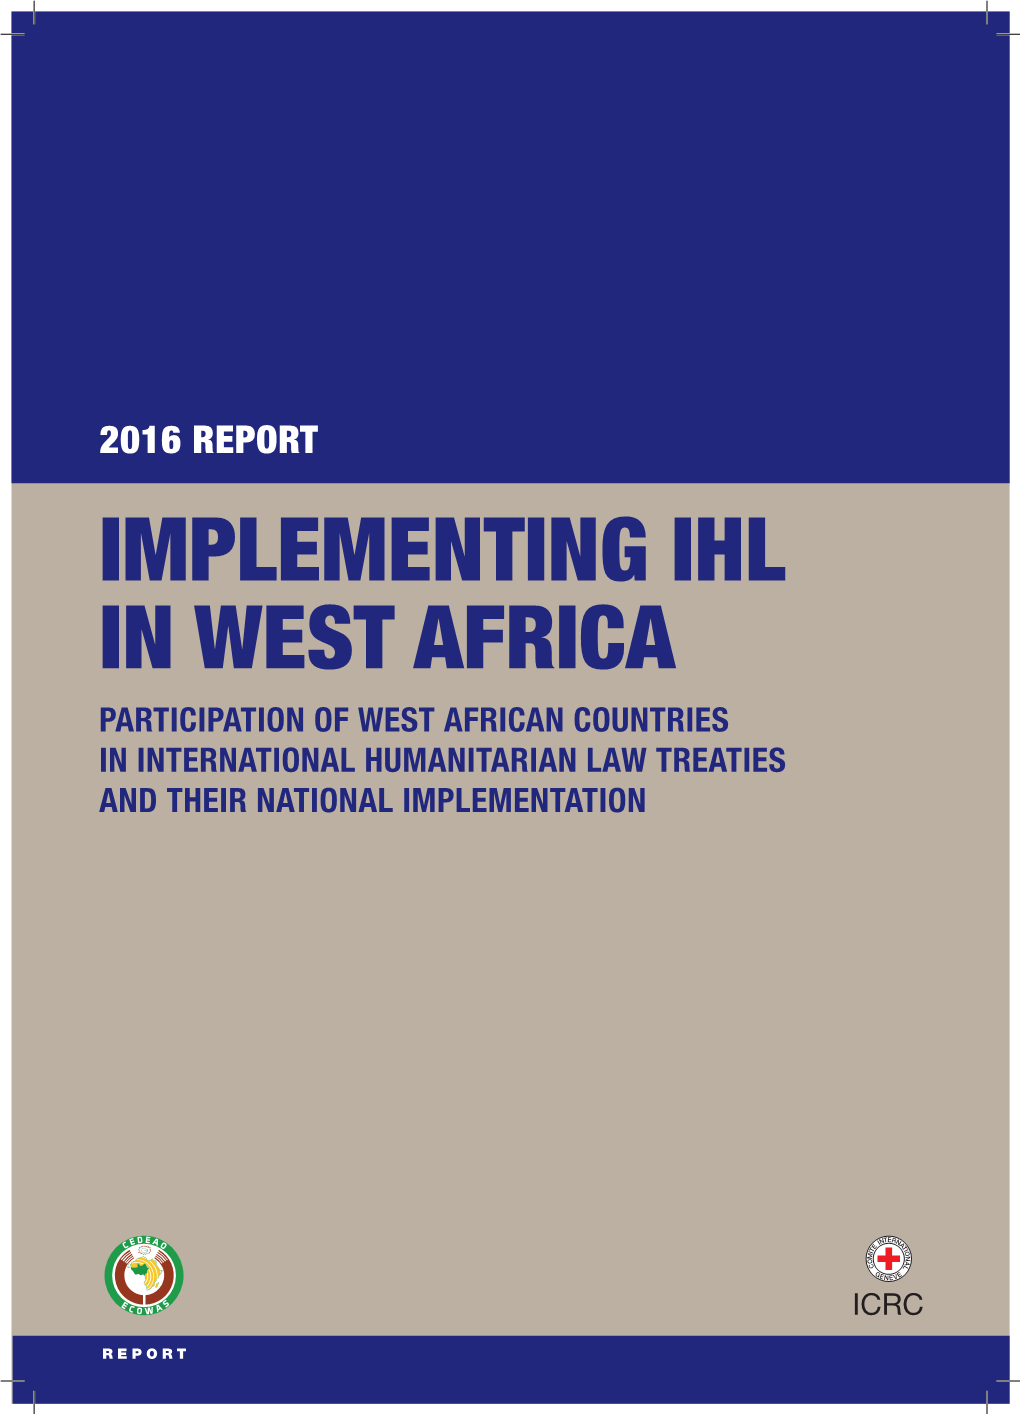 Implementing Ihl in West Africa Participation of West African Countries in International Humanitarian Law Treaties and Their National Implementation